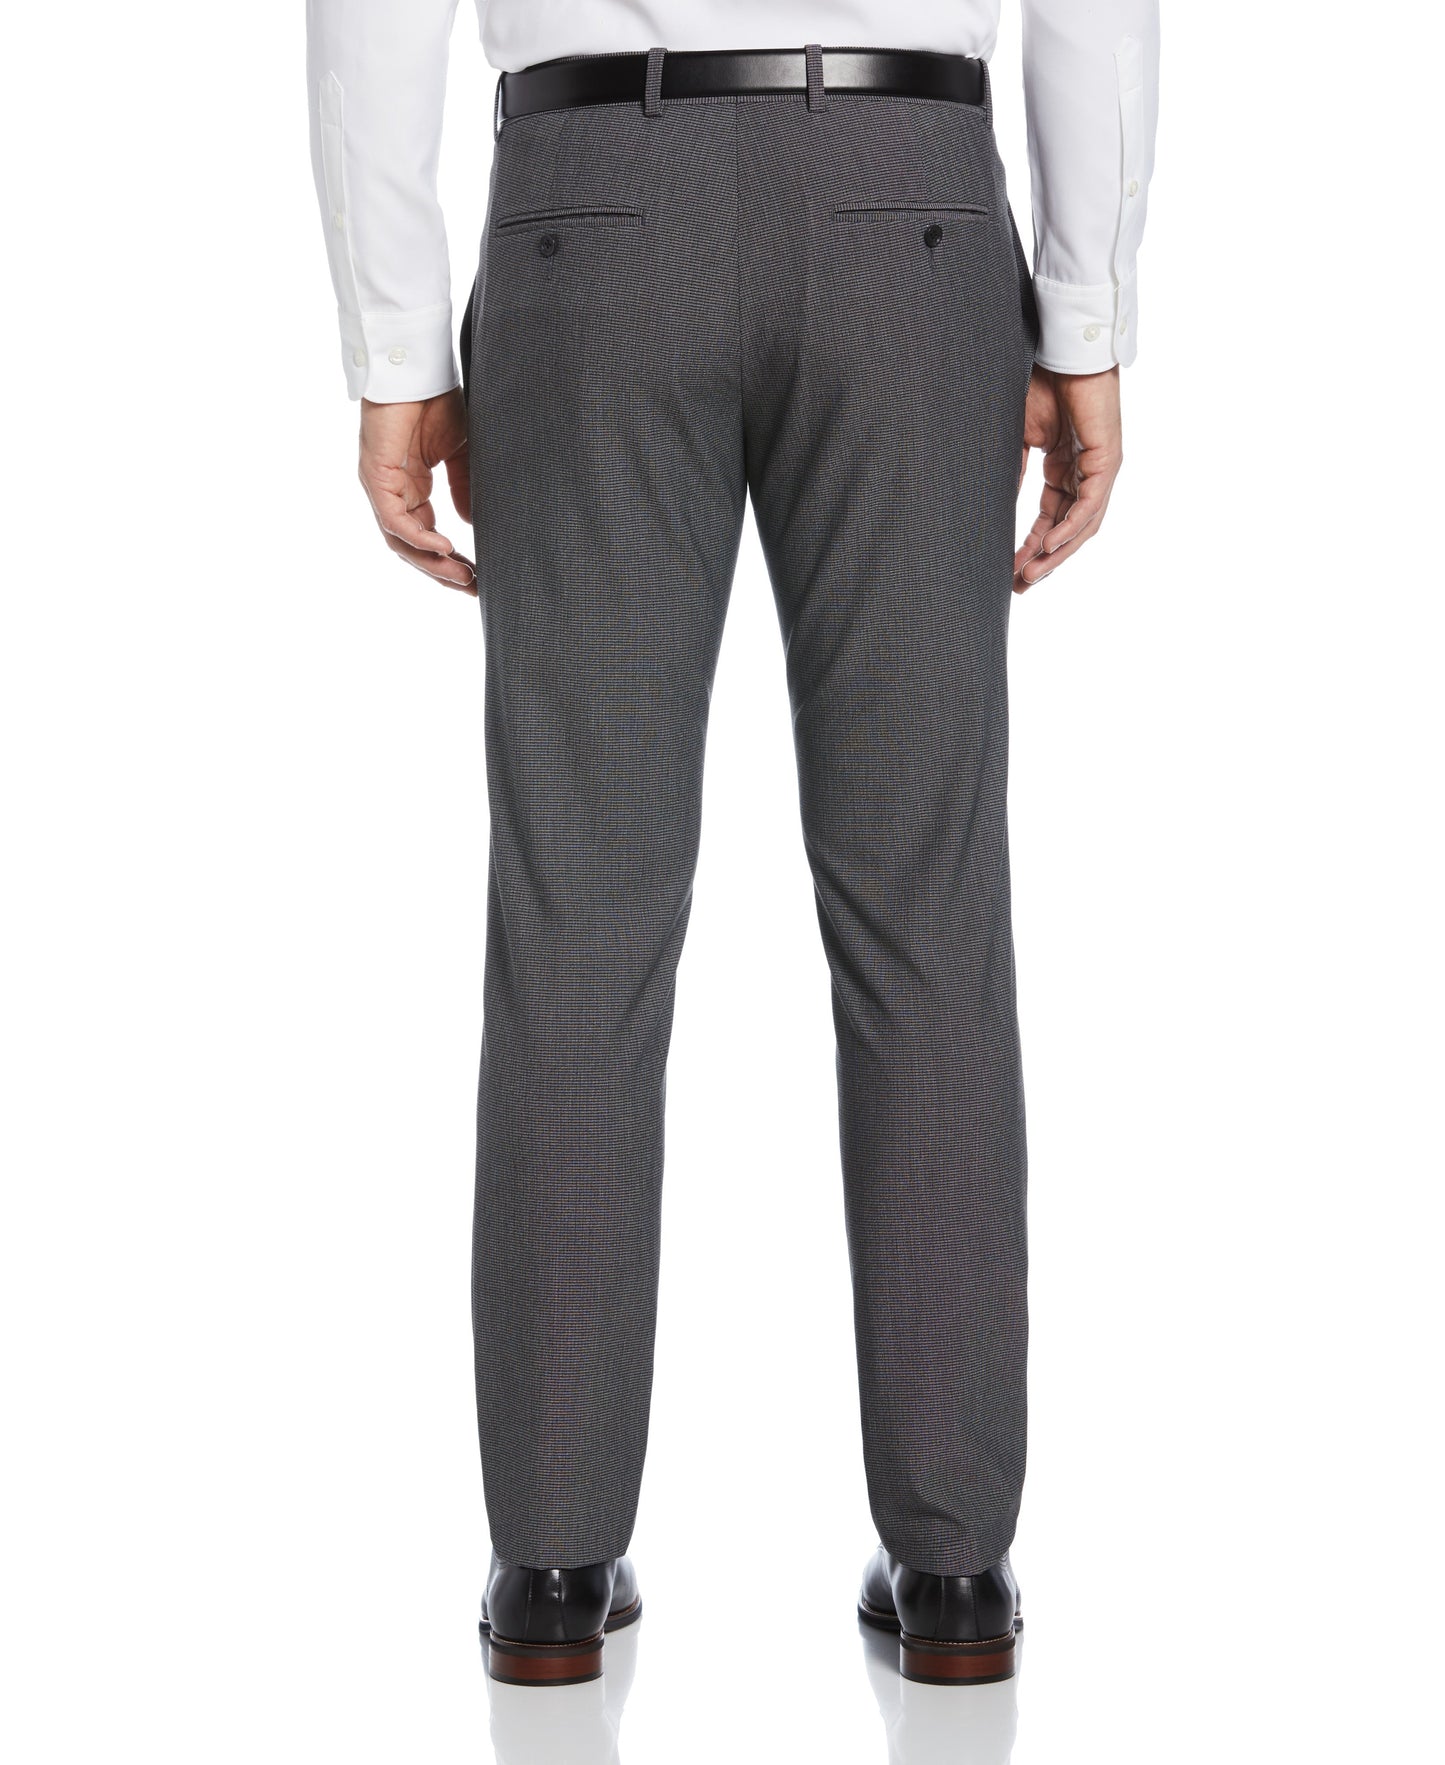 Very Slim Fit Stretch Micro Houndstooth Suit Pant